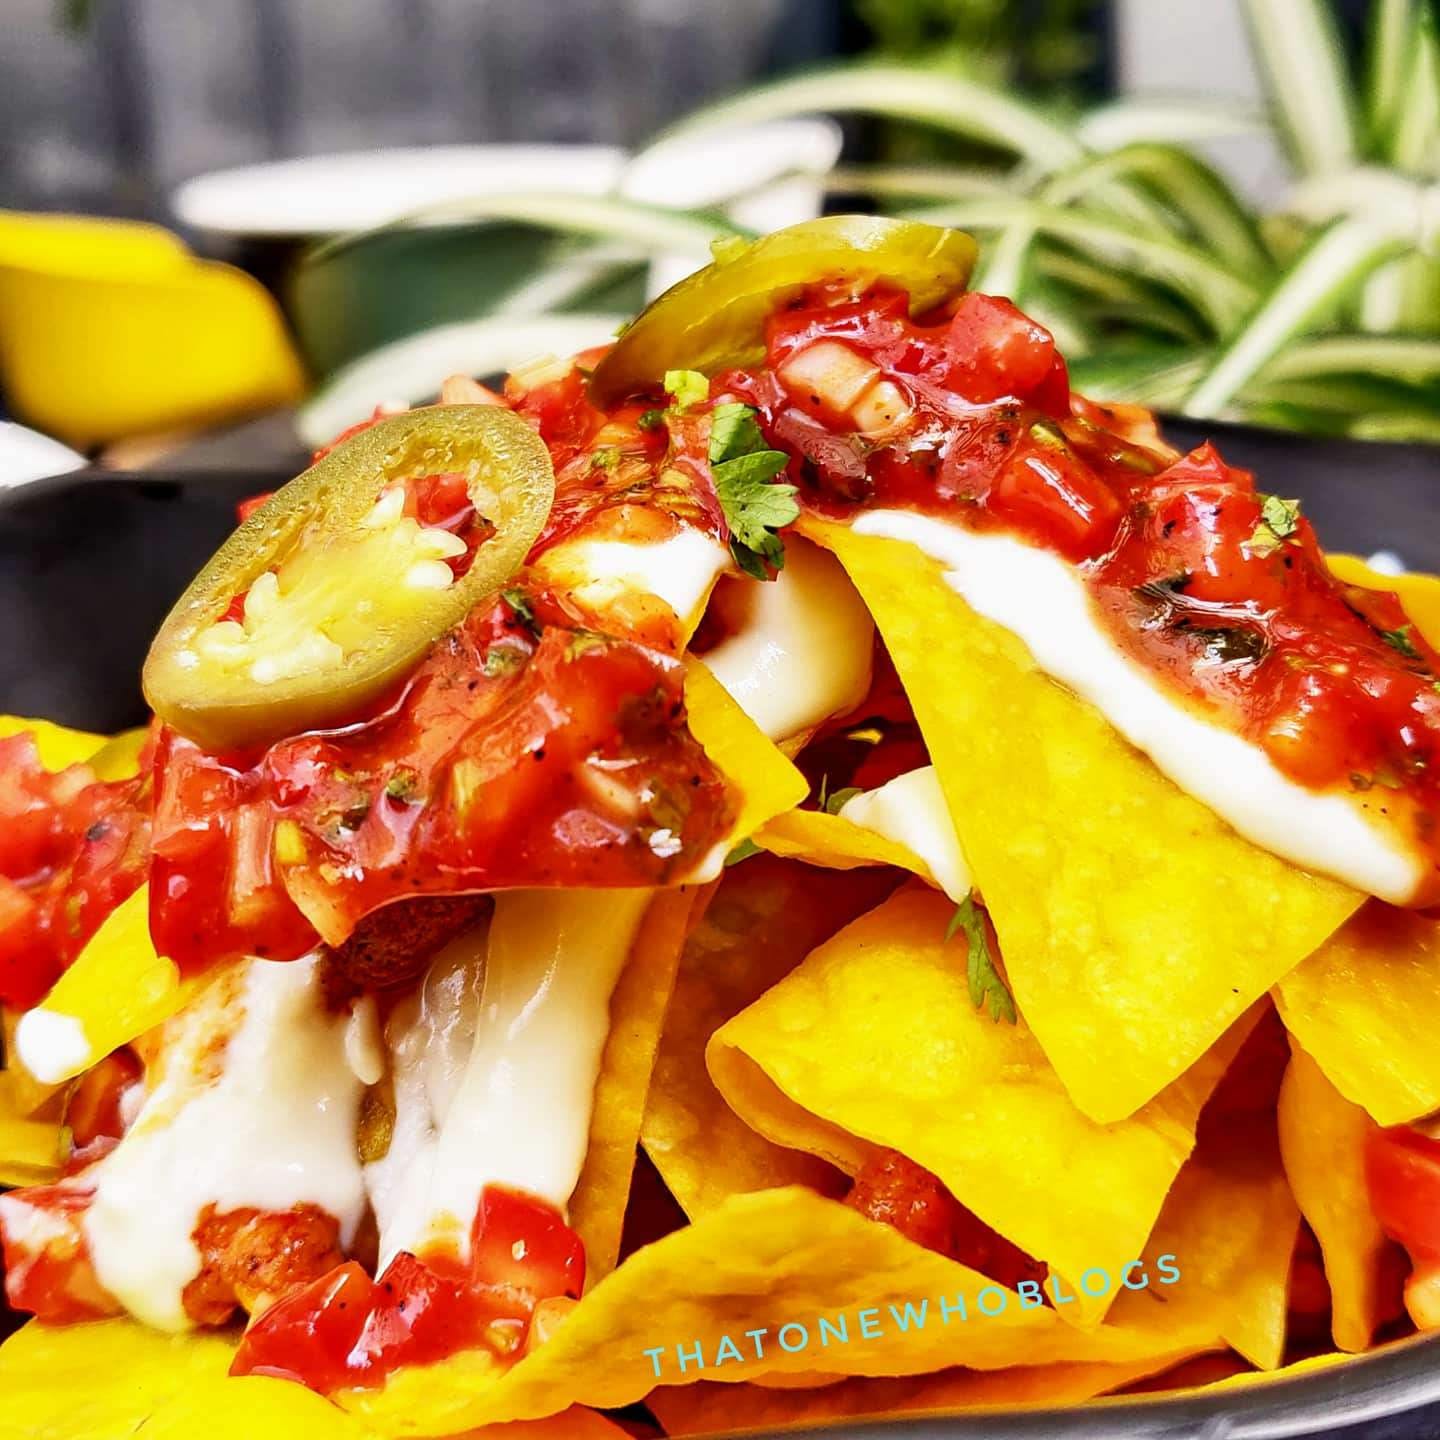 Dish,Food,Cuisine,Ingredient,Nachos,Produce,Junk food,Meat,Tortilla chip,Mexican food